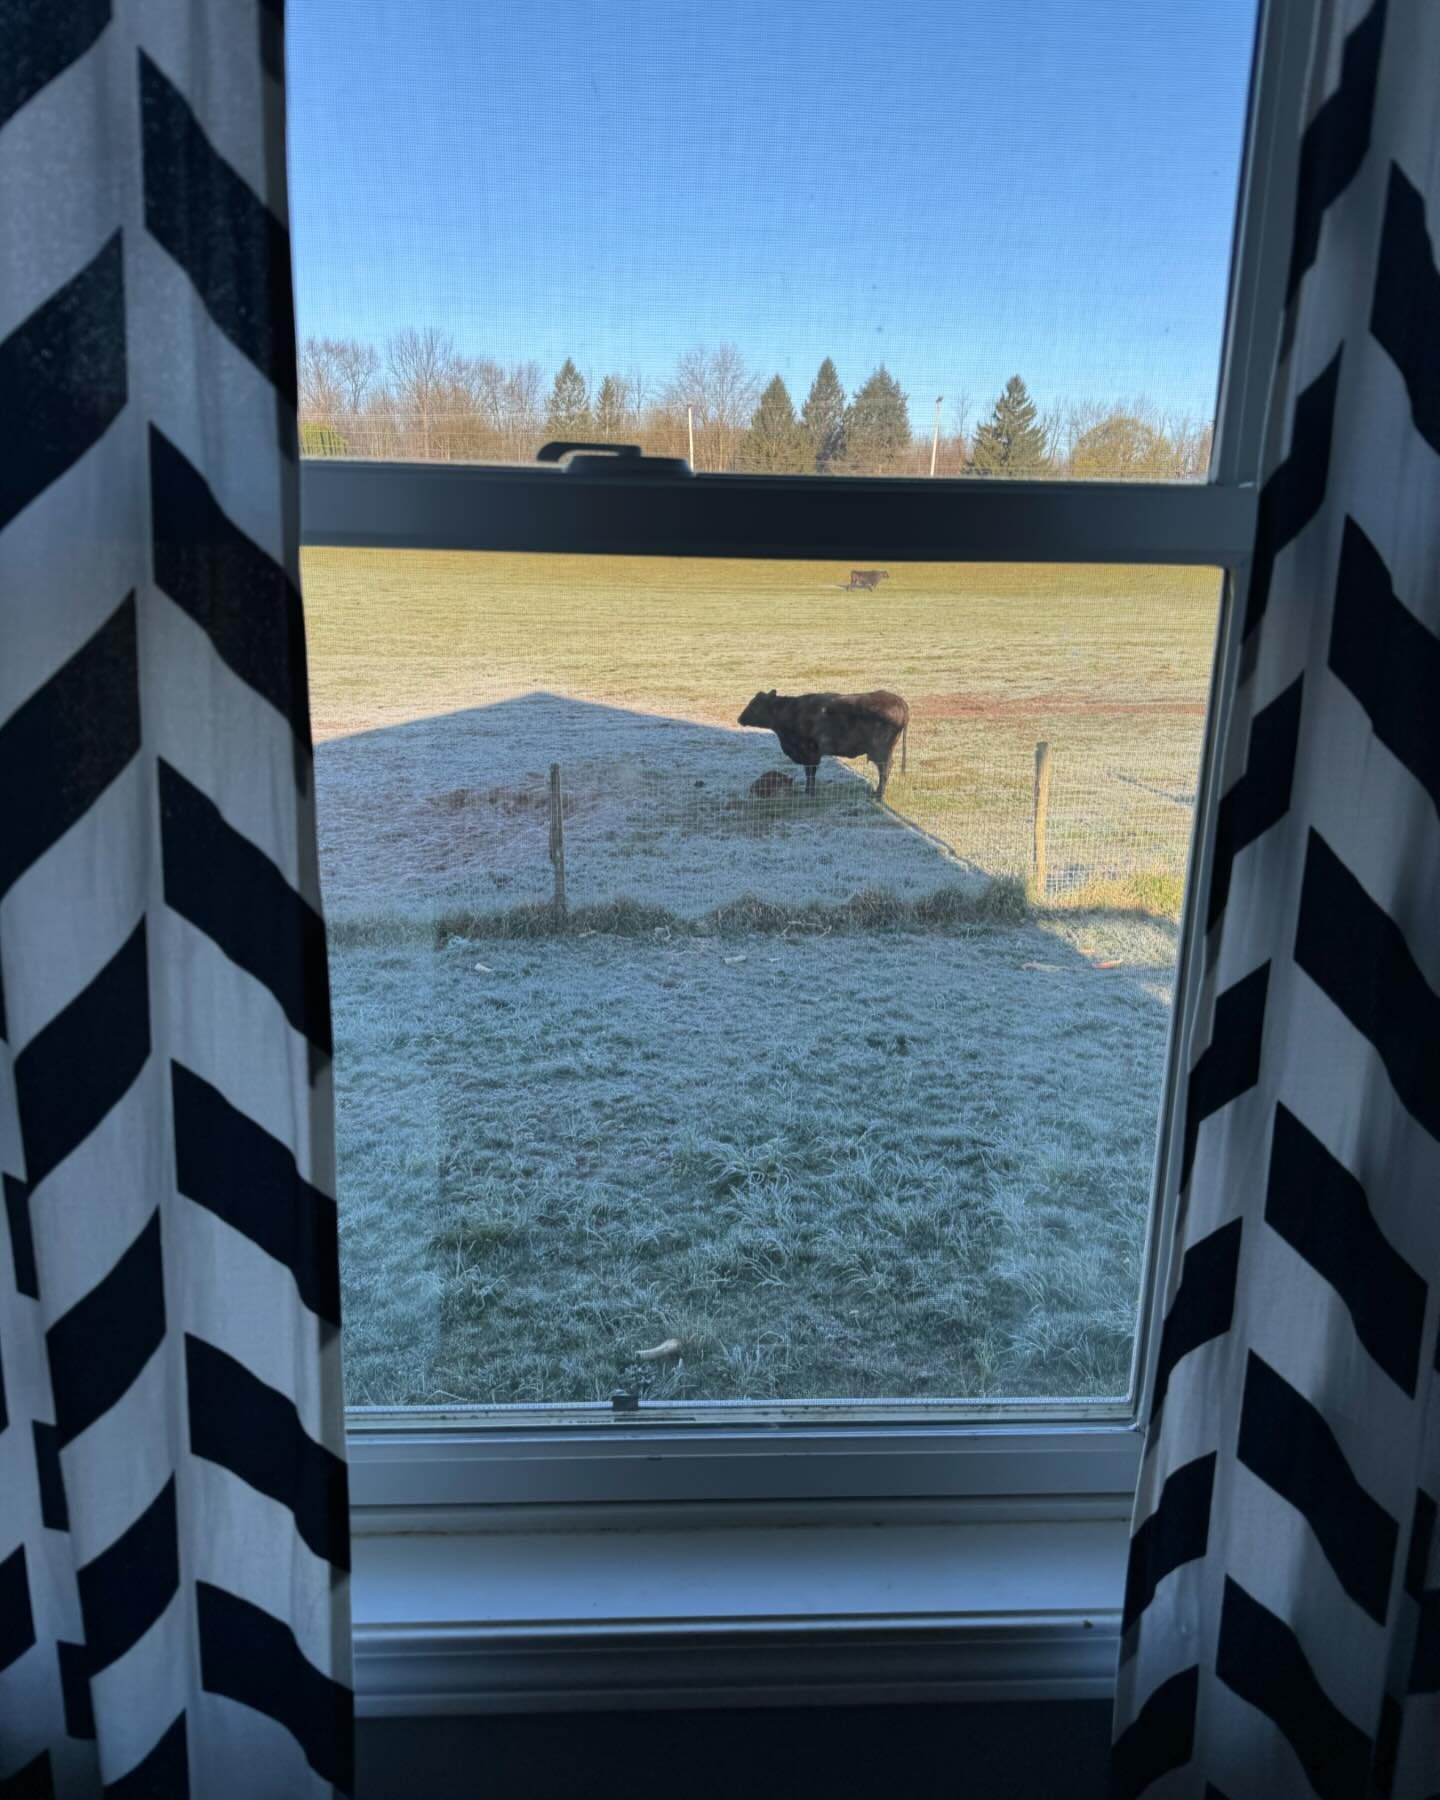 When you have cows in your backyard it&rsquo;s easy to watch out for new babies! This one was born in chilly temps, but momma got it cleaned off quickly so it can stay warm! 

#cows #backyard #pasture #grass